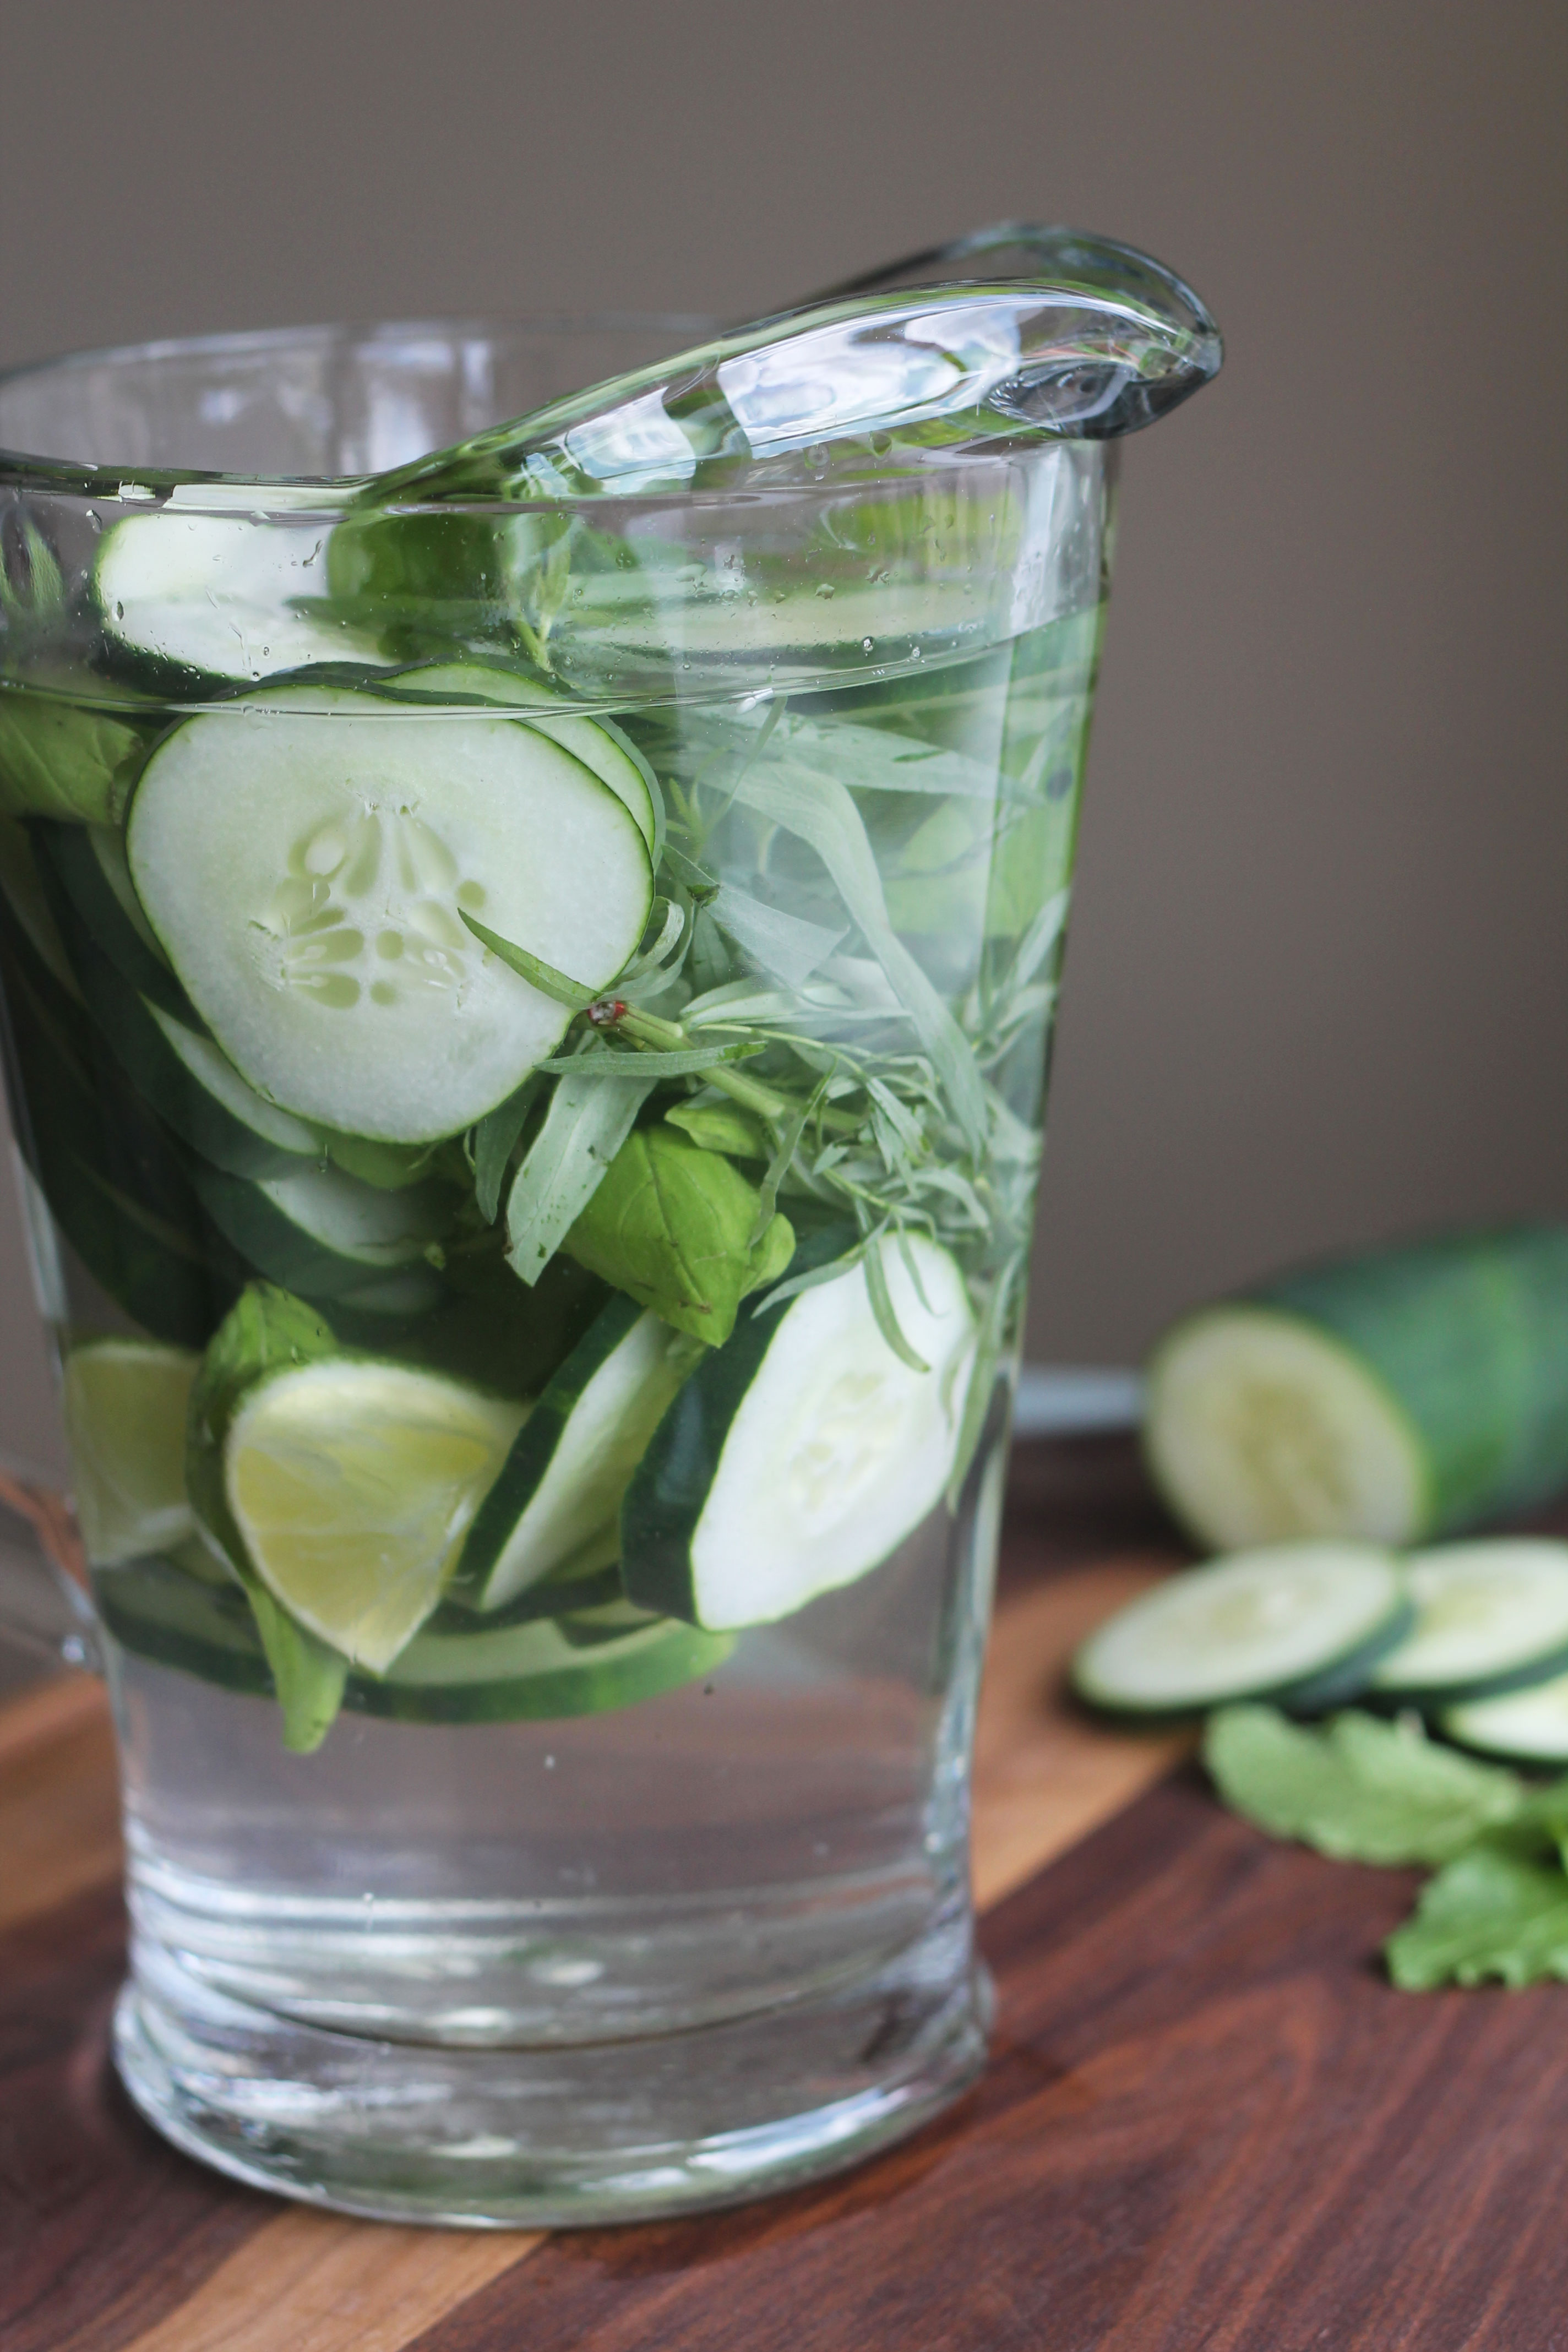 Refreshing Water flavored with cucumbers, lime, and herbs